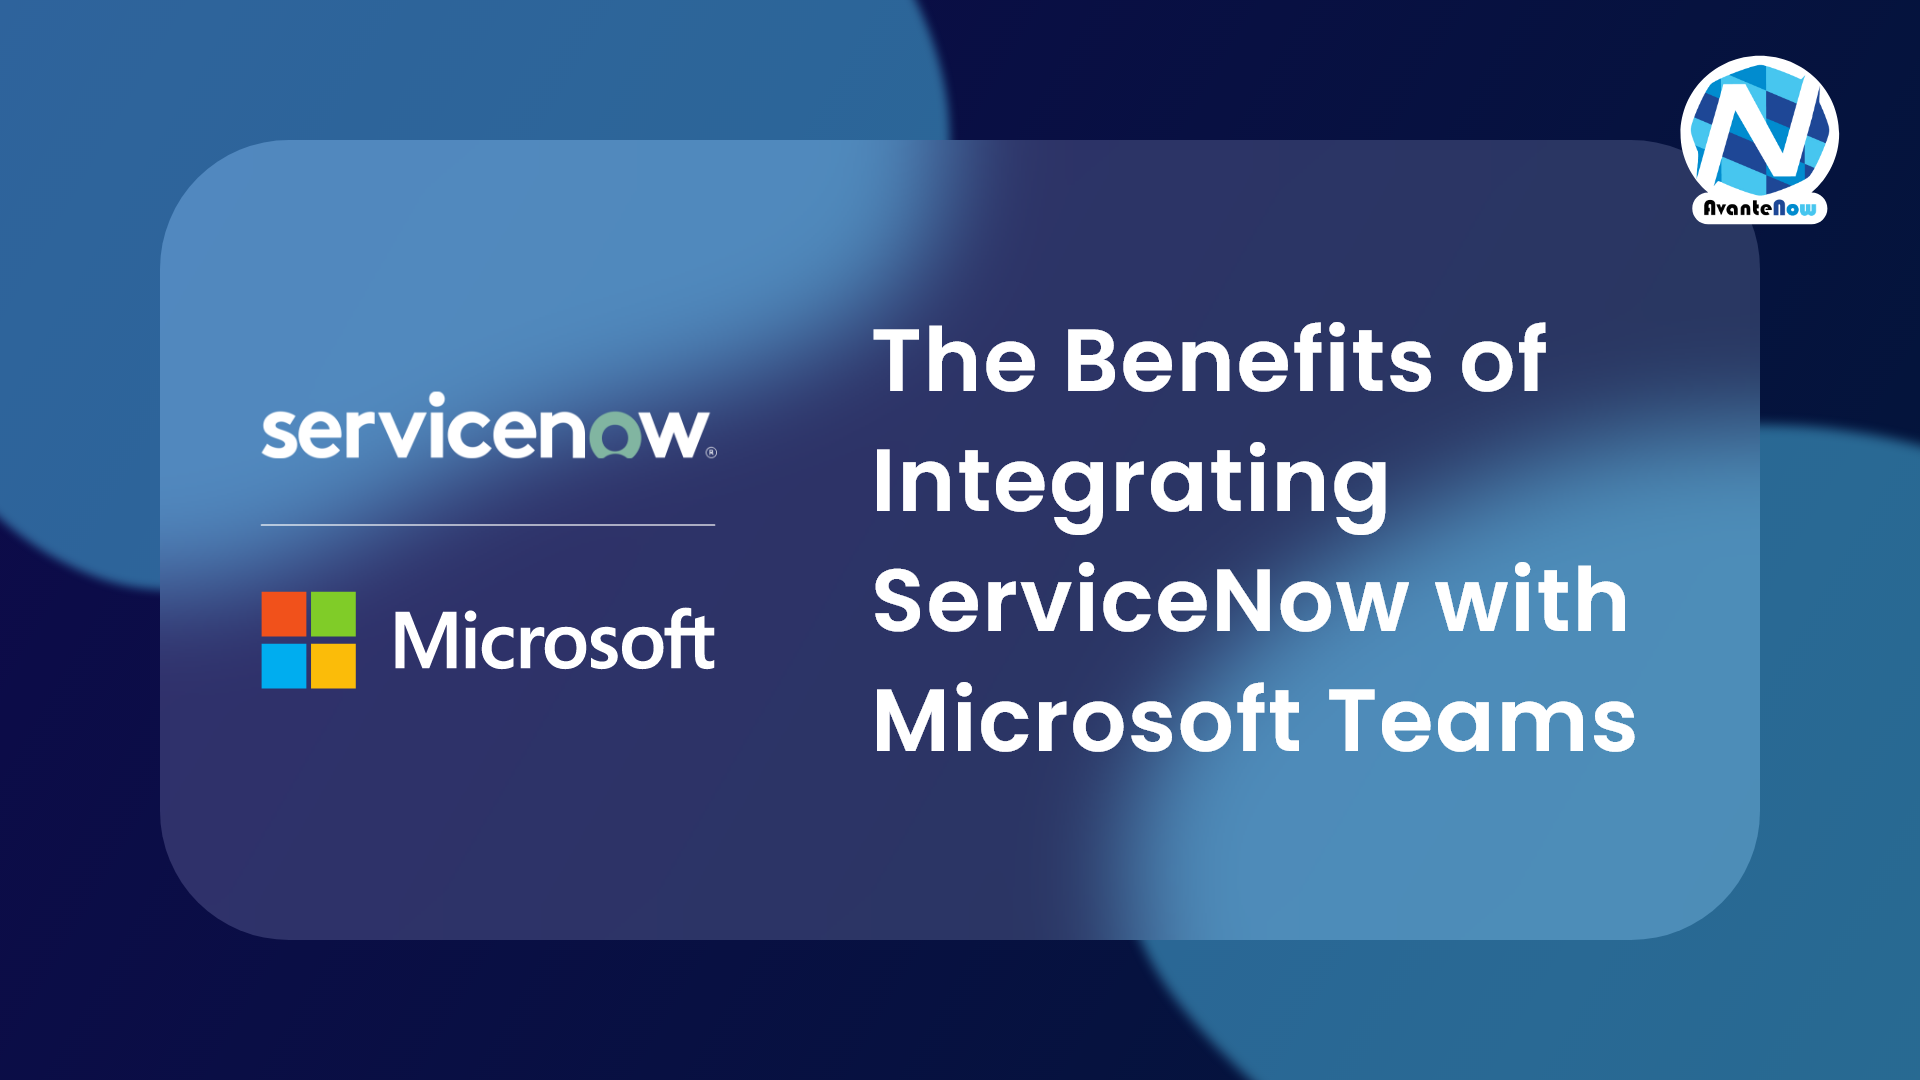 THE BENEFITS OF INTEGRATING SERVICENOW WITH MICROSOFT TEAMS